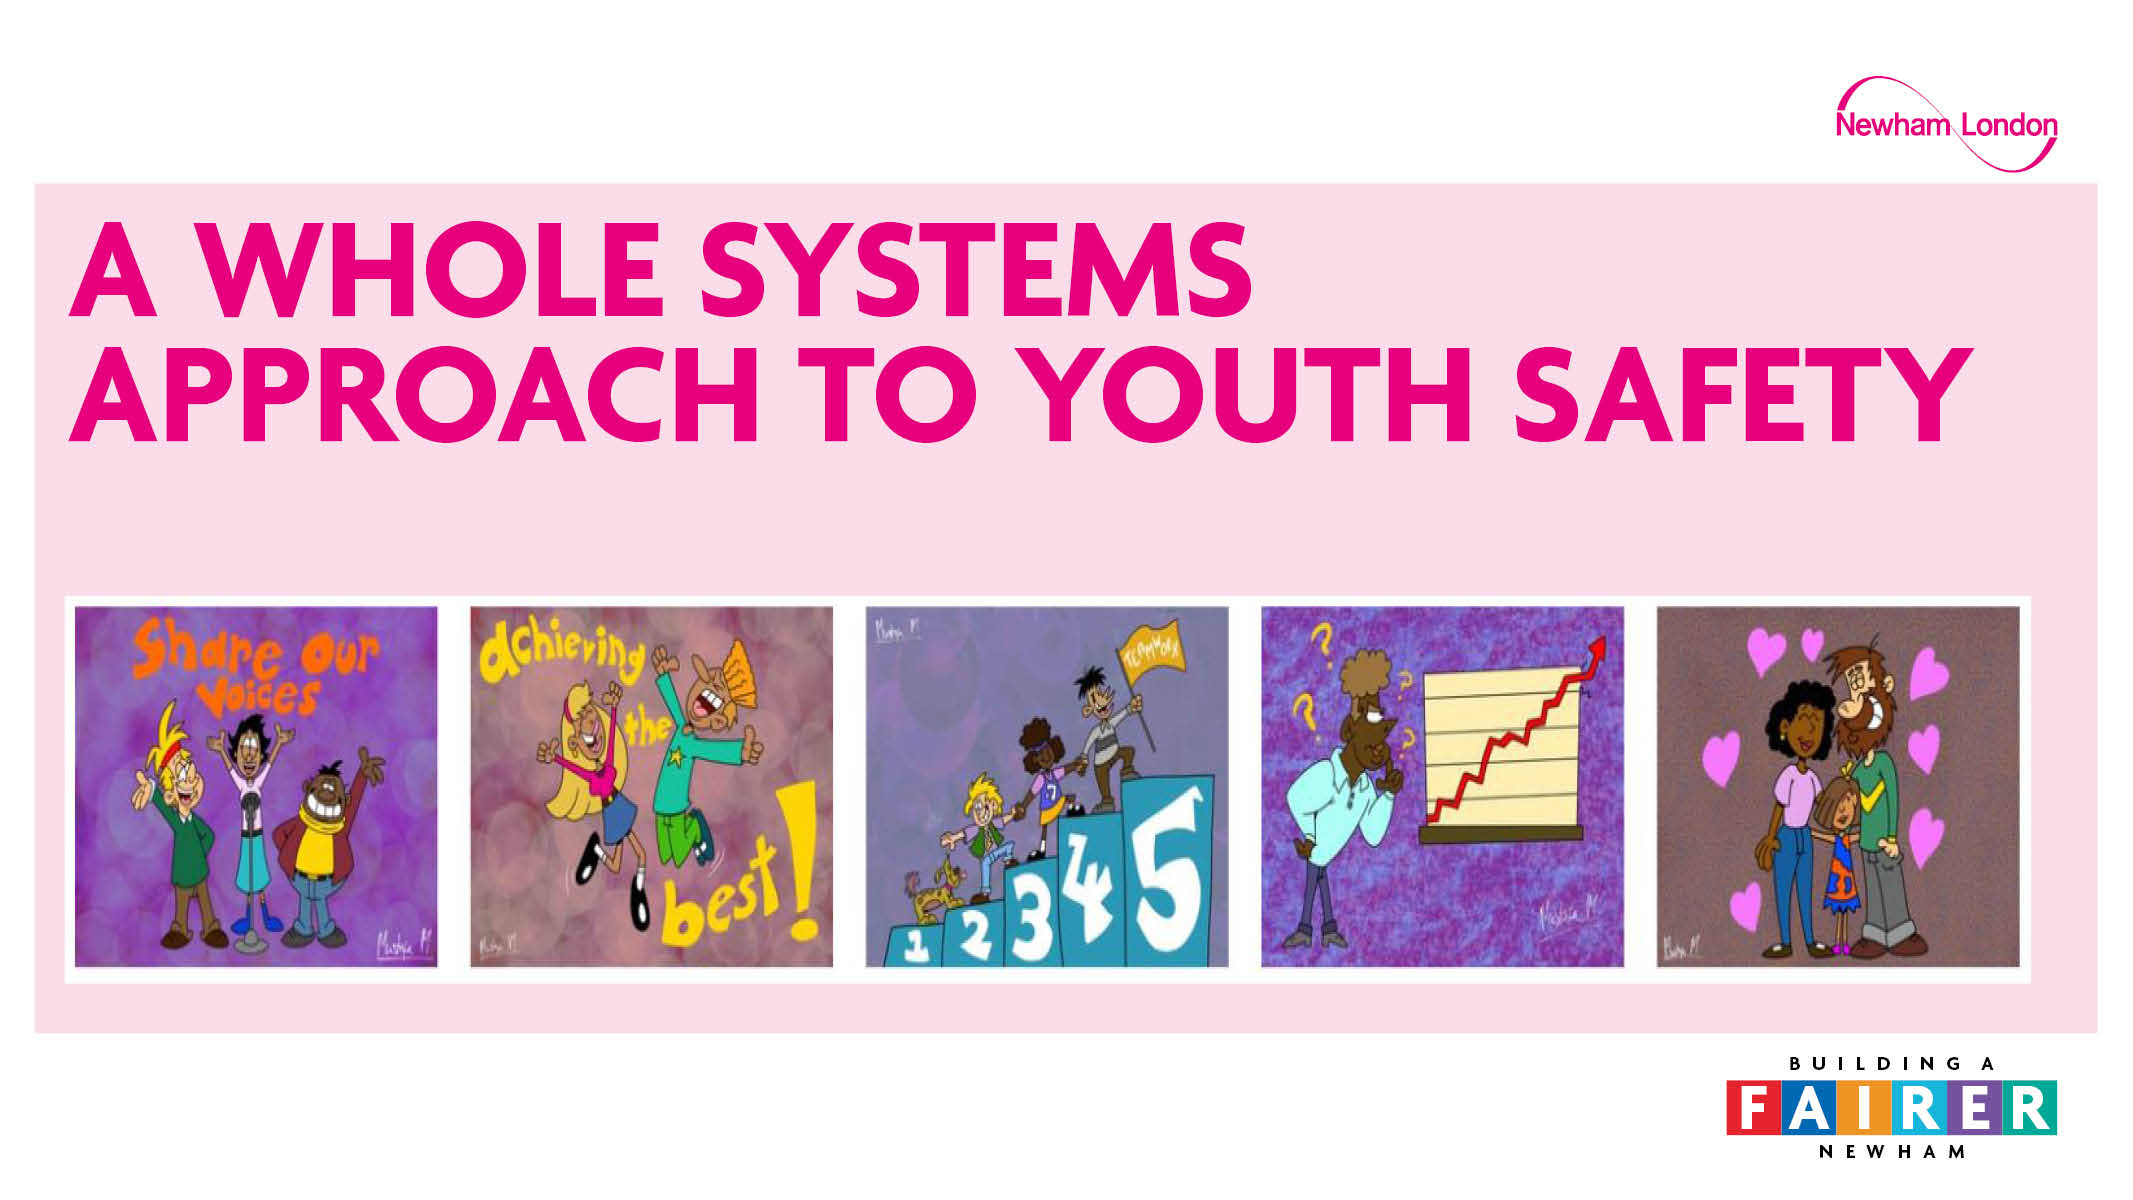 A whole systems approach to youth safety